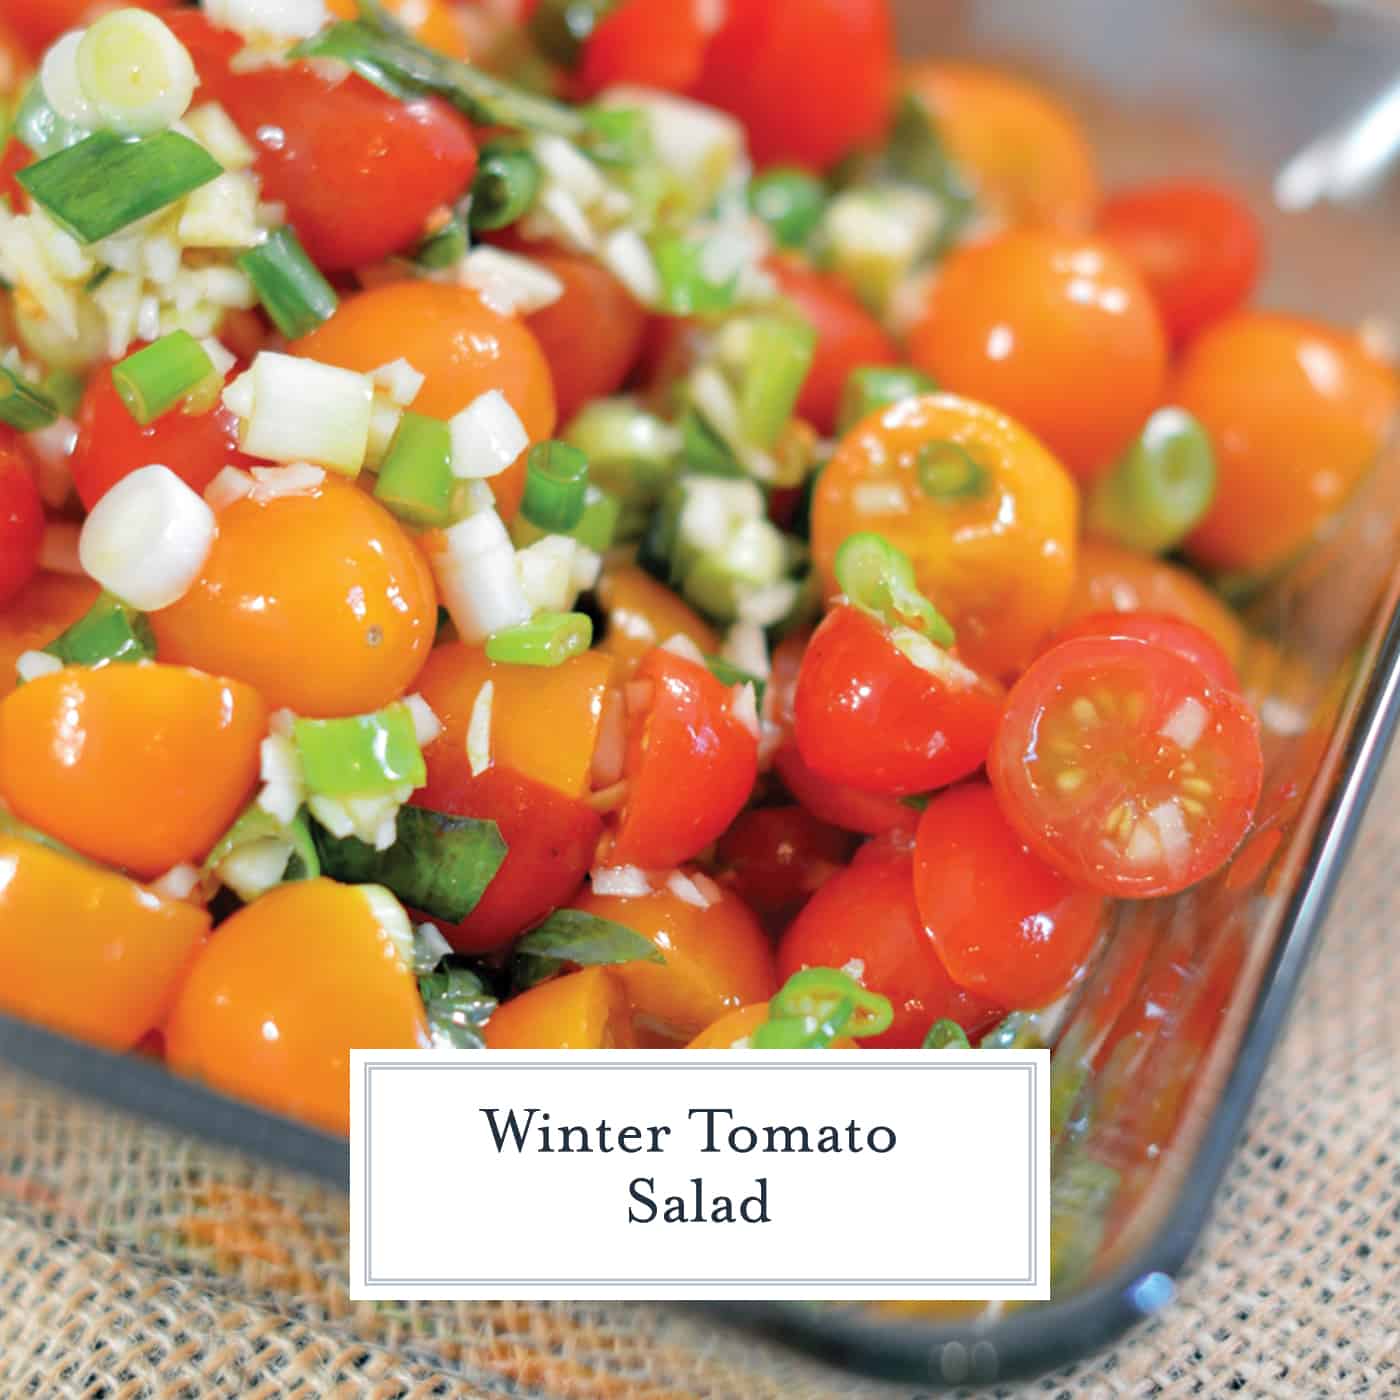 Winter Tomato Salad uses multi-colored cherry tomatoes, lots of garlic, good olive oil and basil to make a tasty side dish recipe perfect for the winter months. #tomatosalad #tomatosidedishes www.savoryexperiments.com 